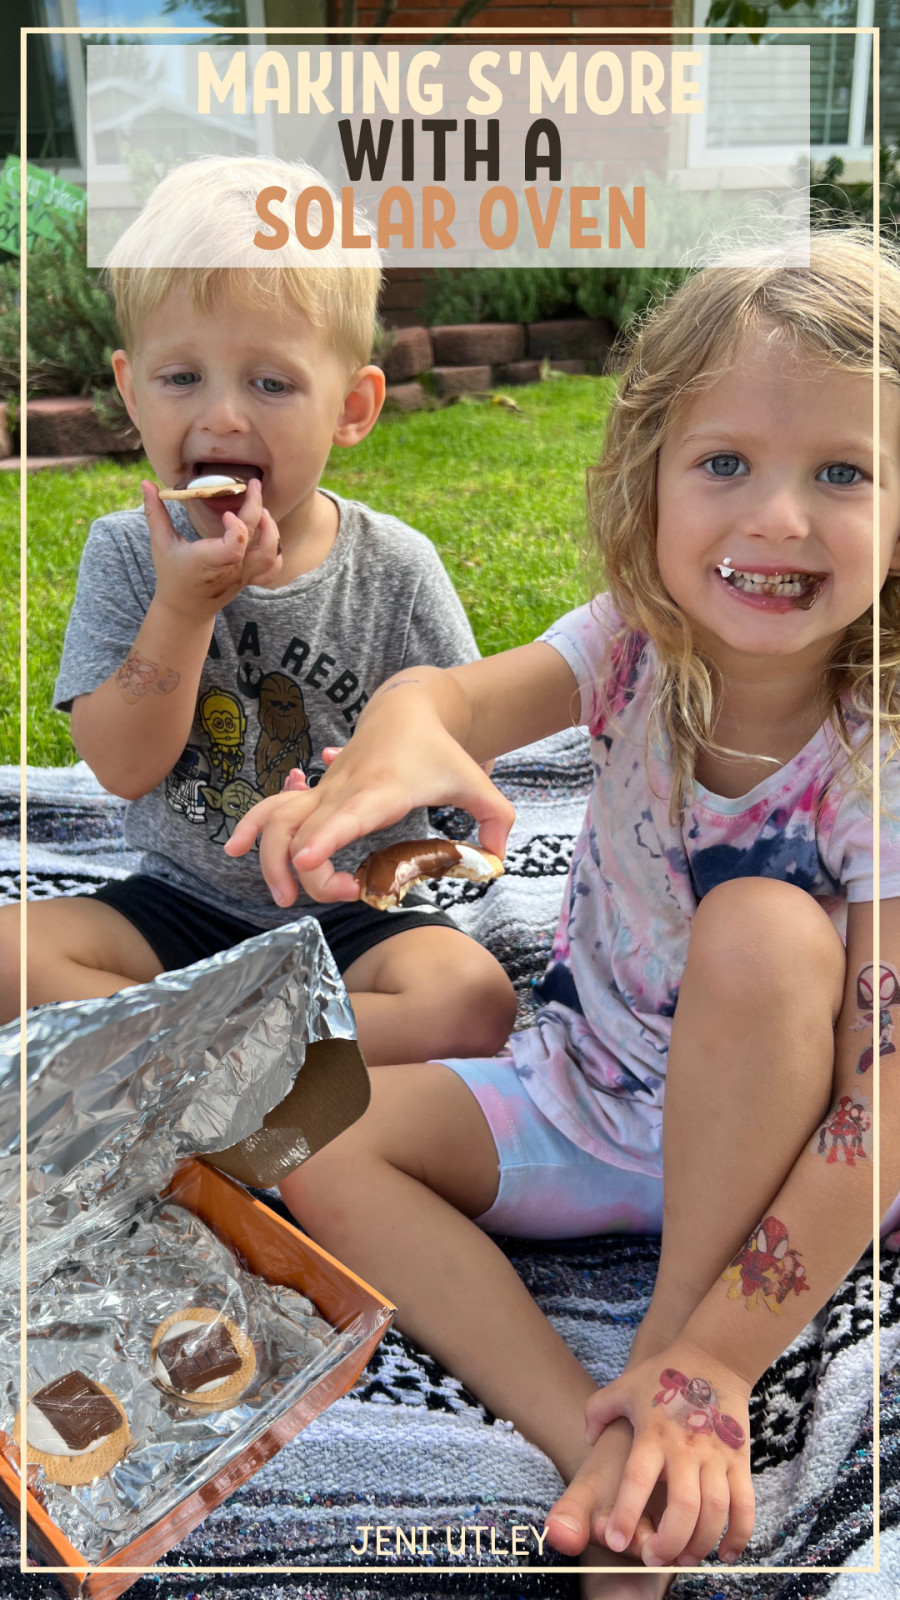 MAKING S'MORES WITH A SOLAR OVEN